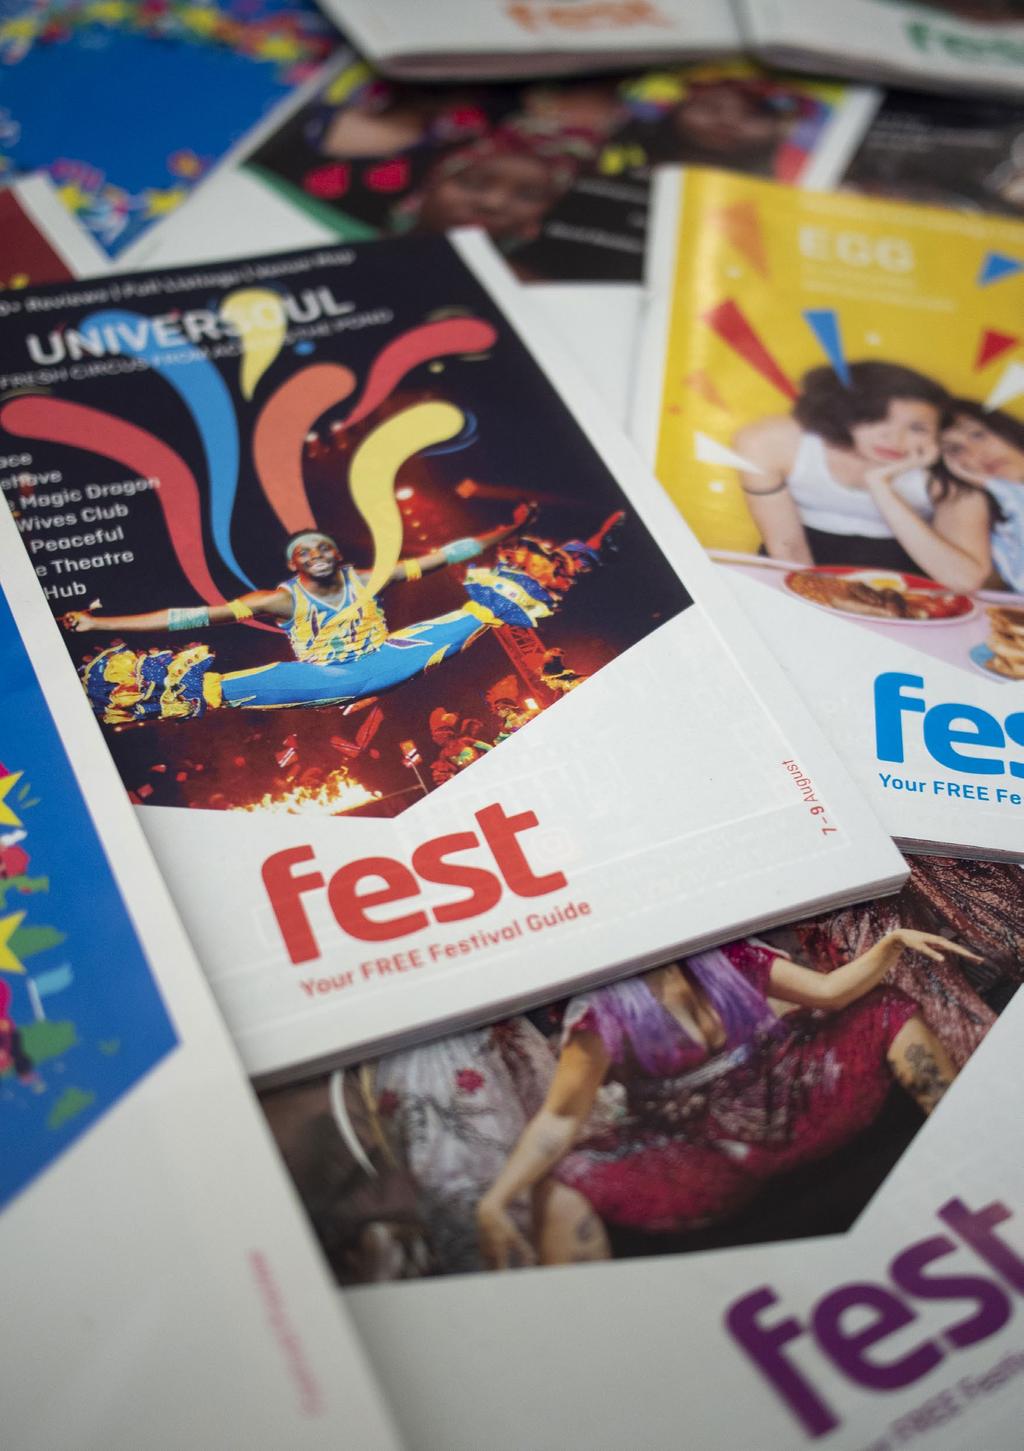 Fest is the biggest and best Edinburgh Festival Magazine 2 We distribute 125,000 free copies reaching over 500,000 readers every summer Launched 17 years ago with the goal of bringing a fresh